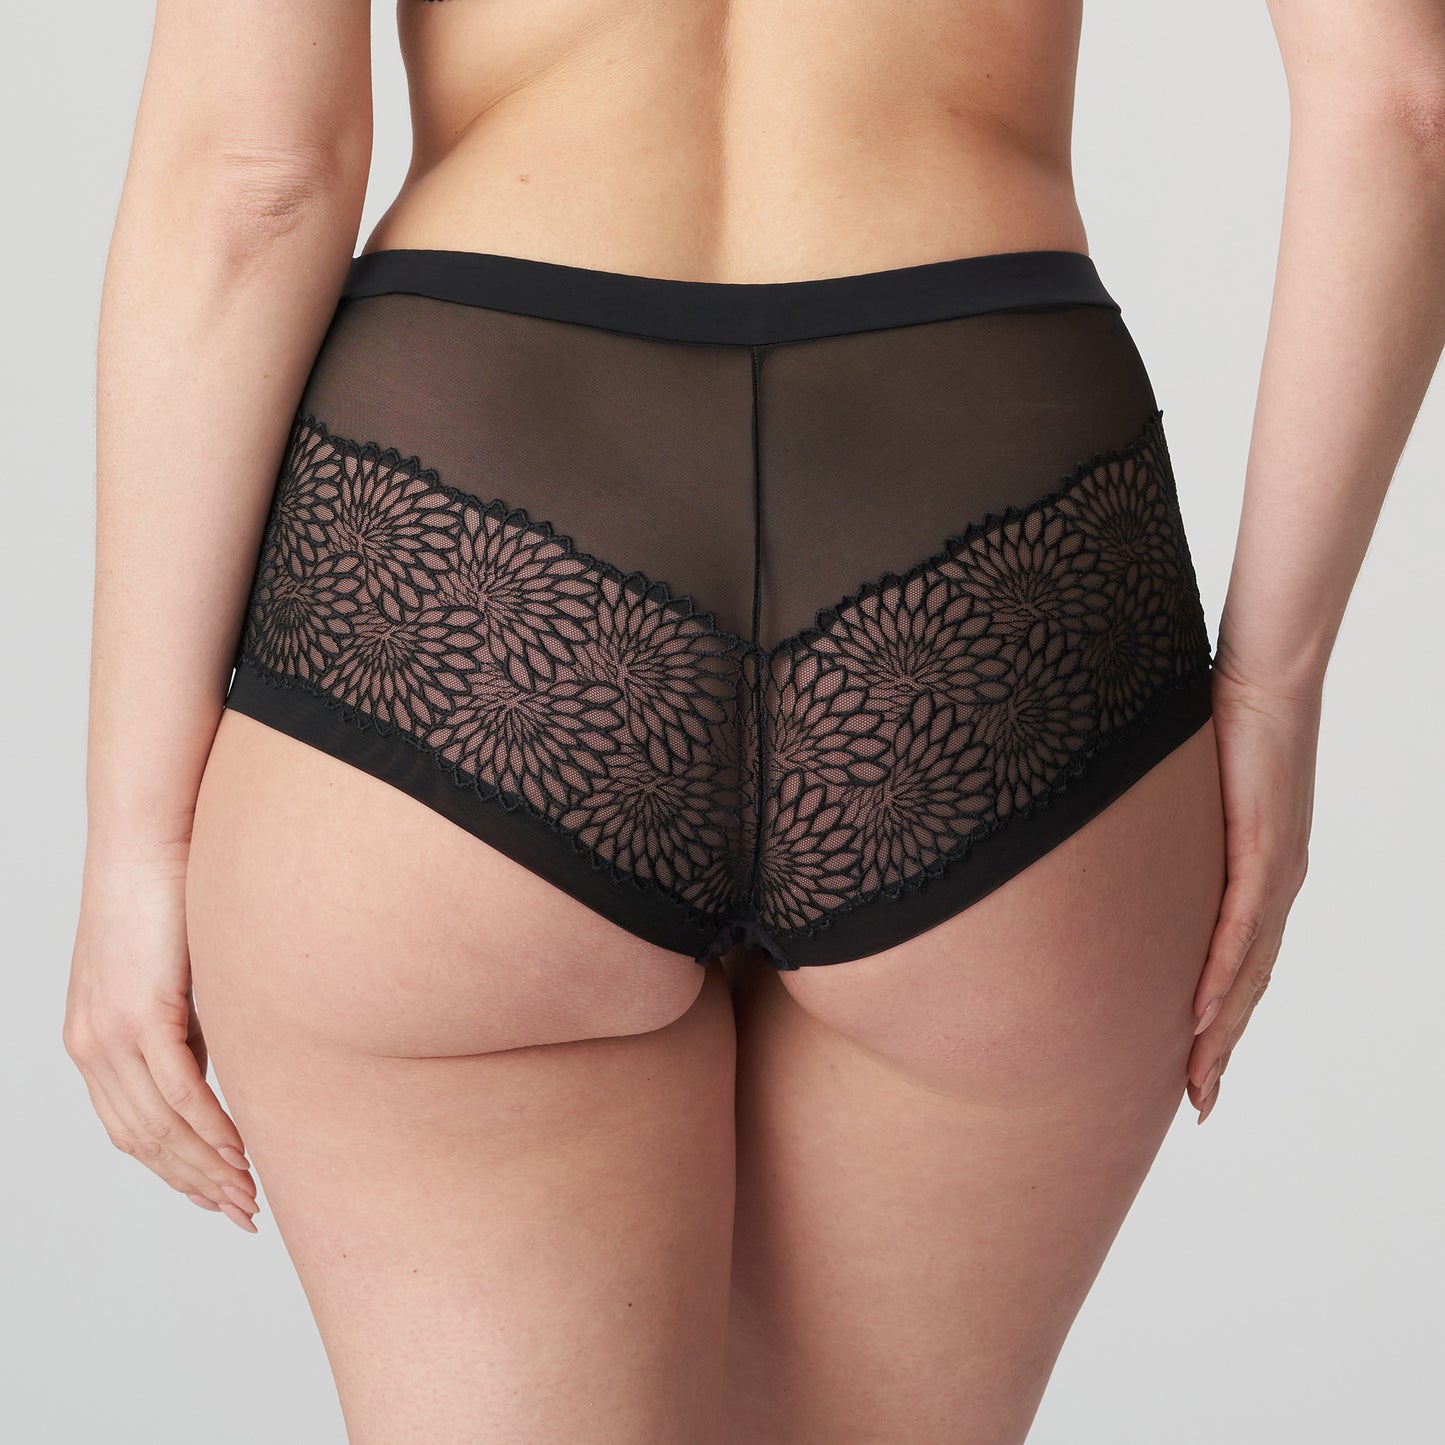 Back view of a woman wearing the Sophora high-waisted cheeky panty in Black by PrimaDonna.